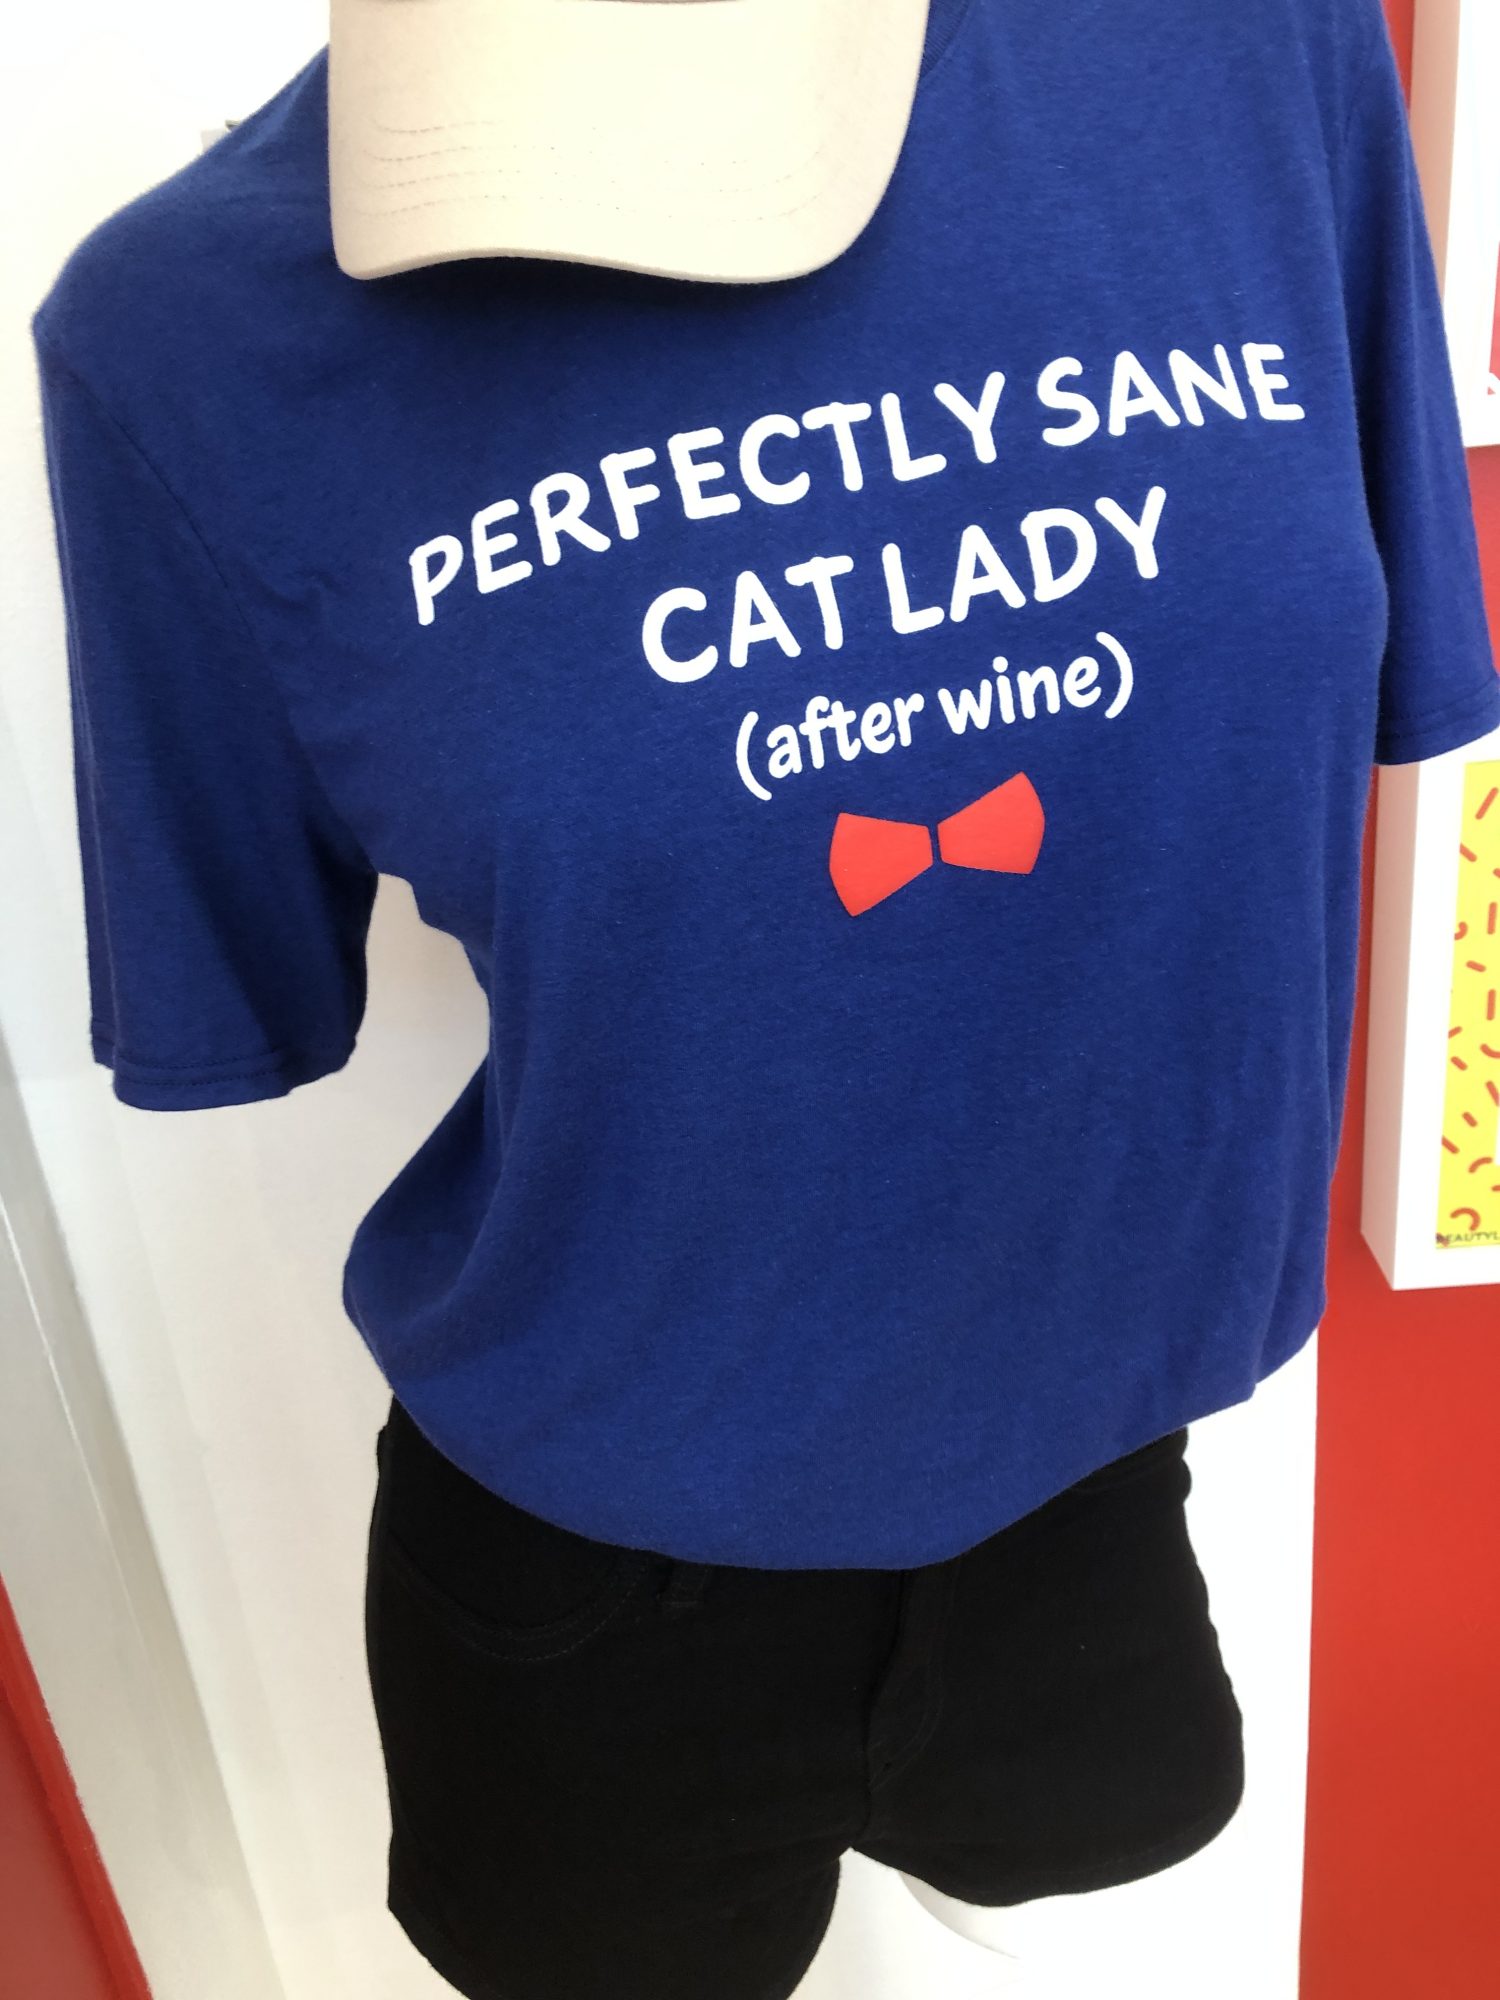 Beau Tyler - Perfectly sane cat lady after wine shirt temp